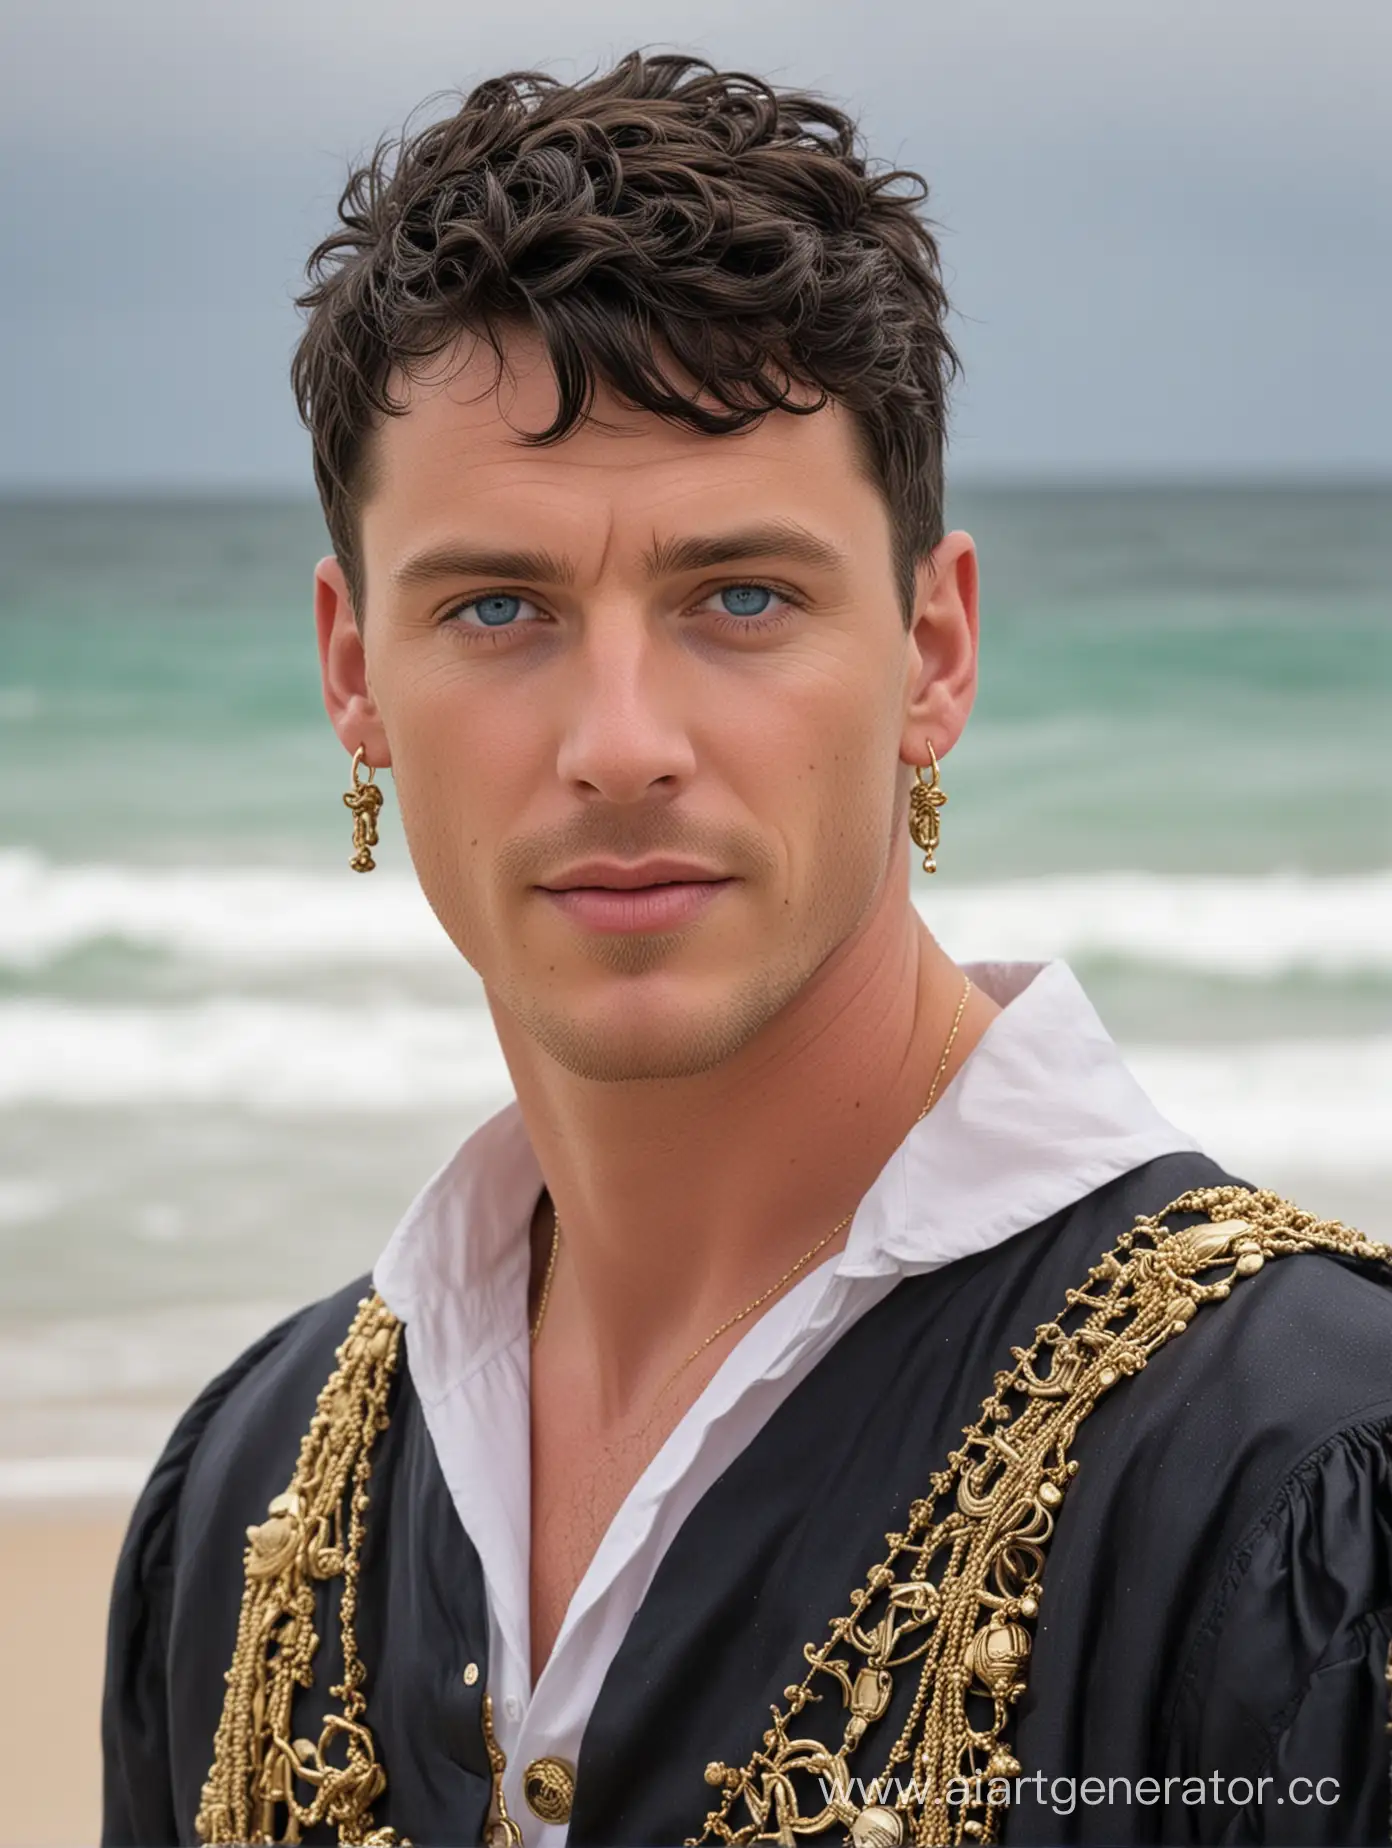 Pirate-Man-with-Wavy-Hair-and-Gold-Earring-on-Beach